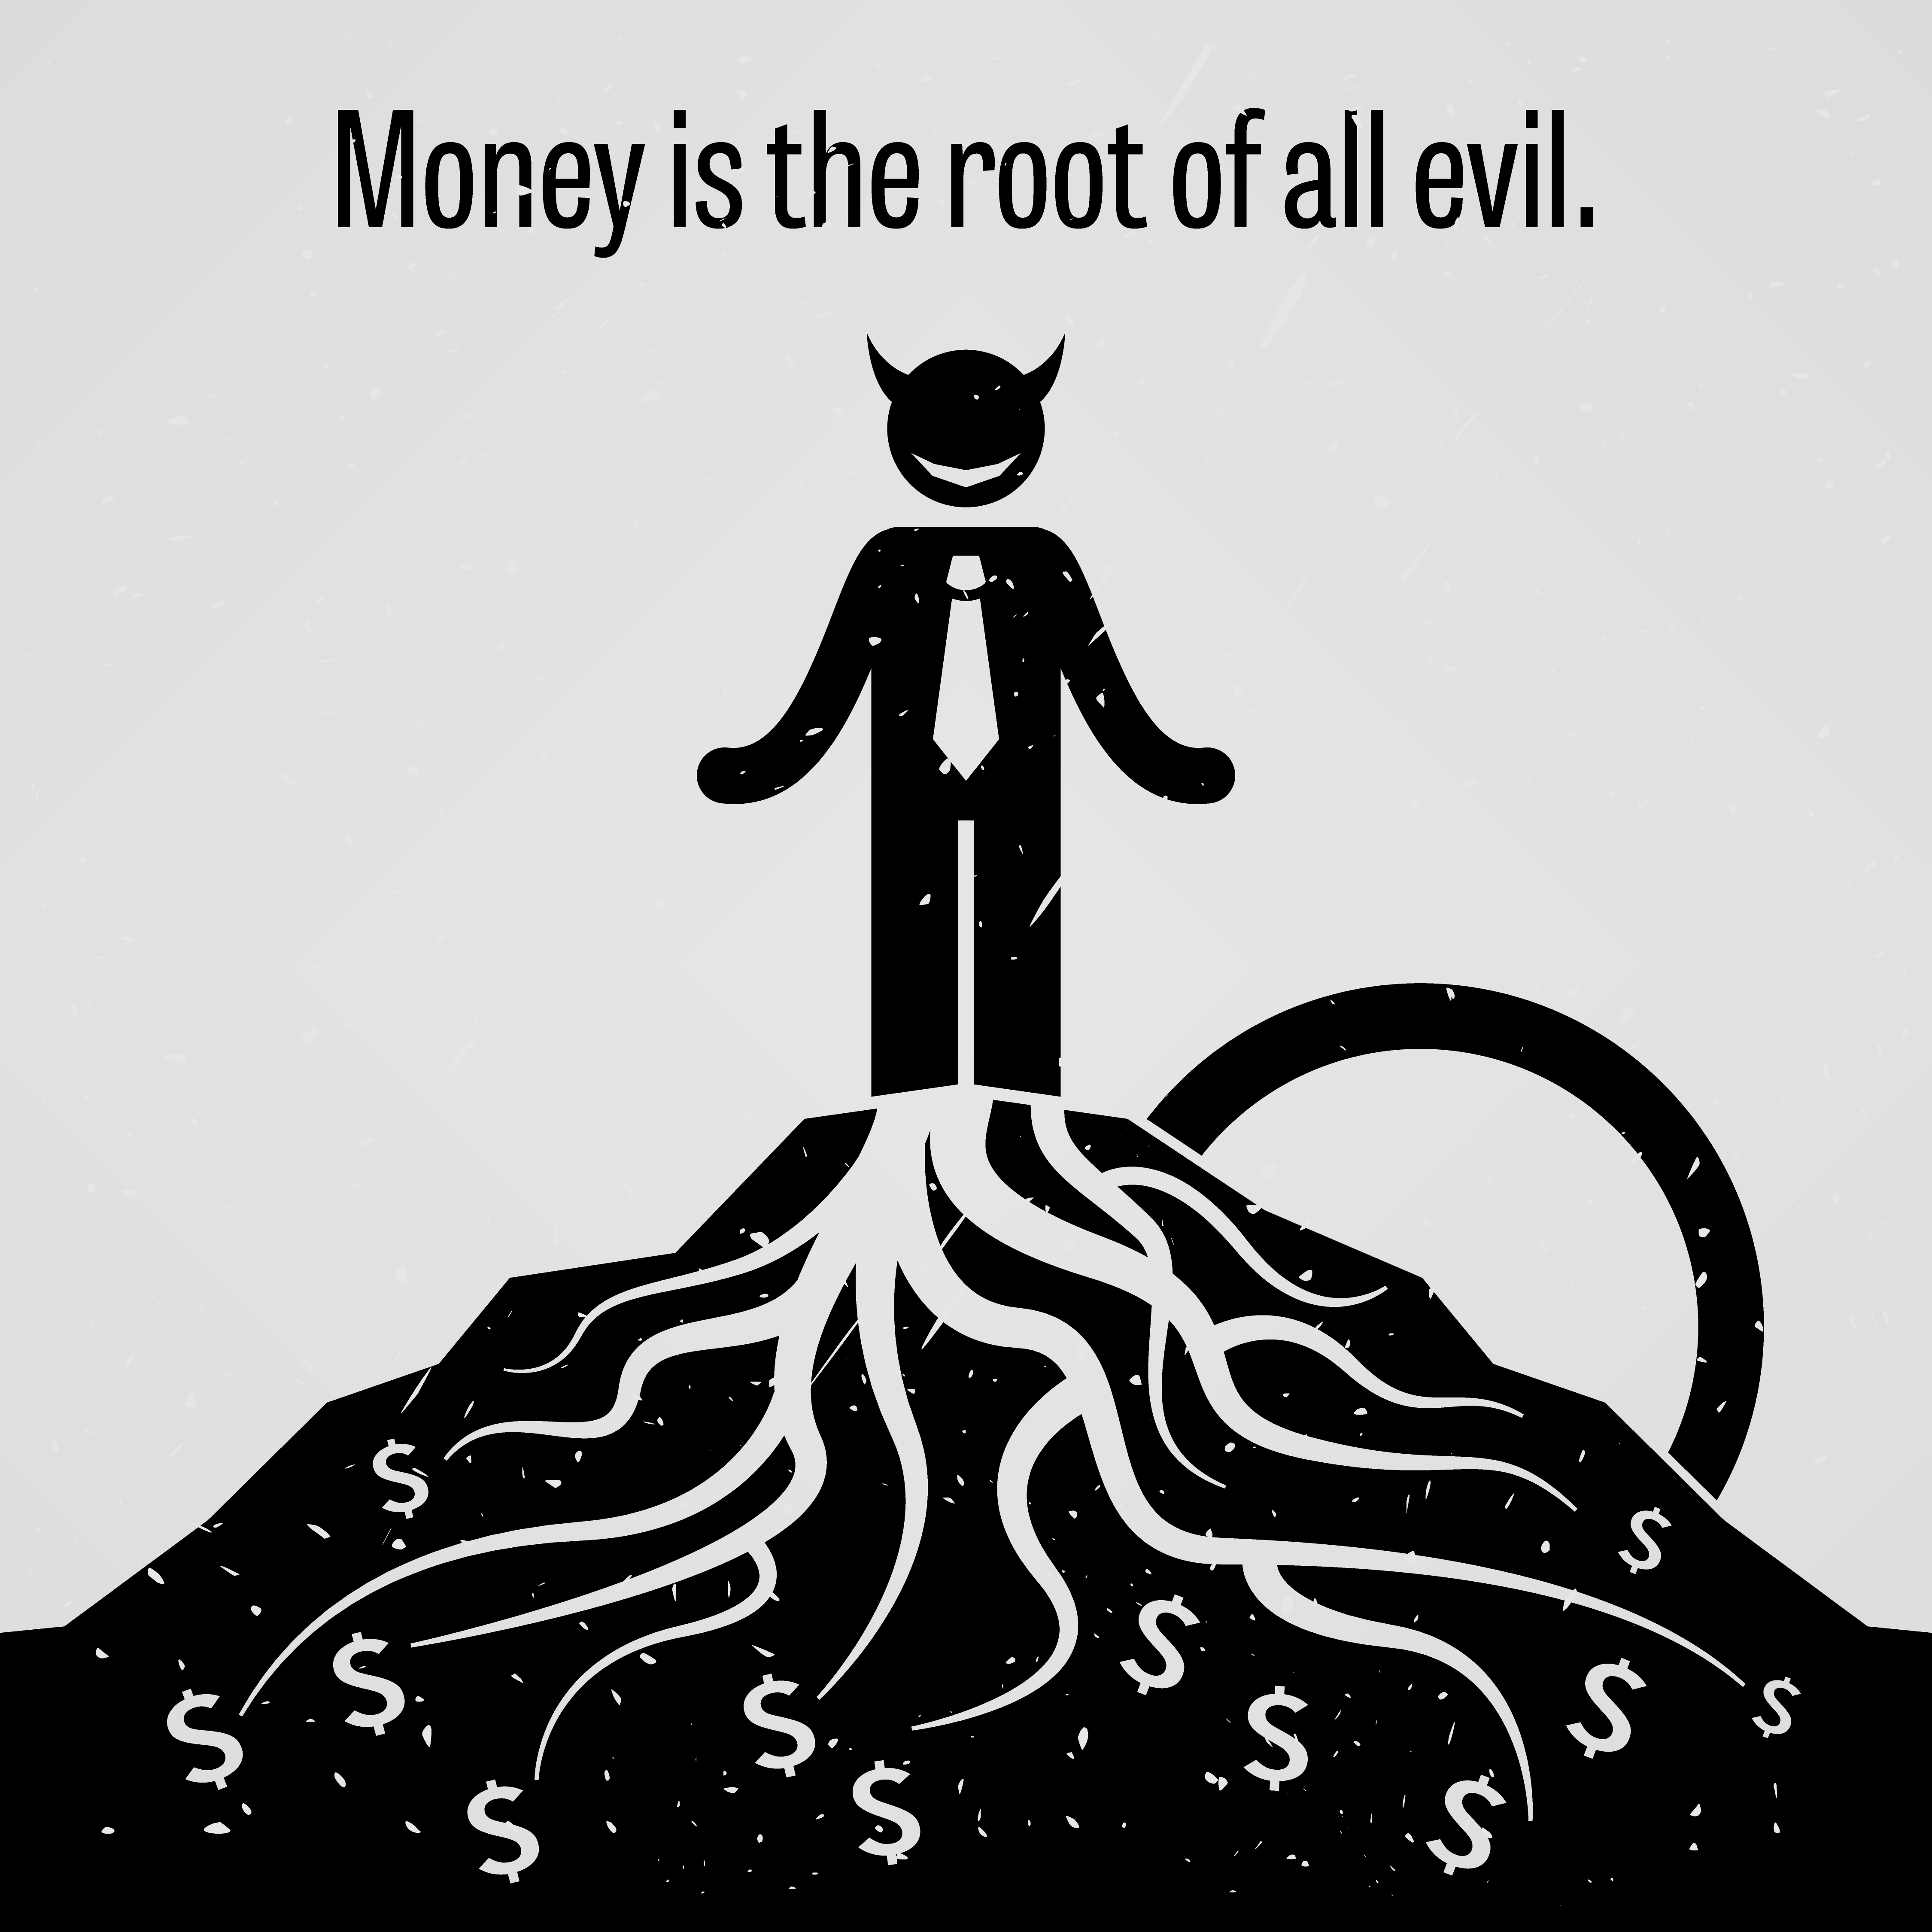 Download the Money is the Root of all Evil. 